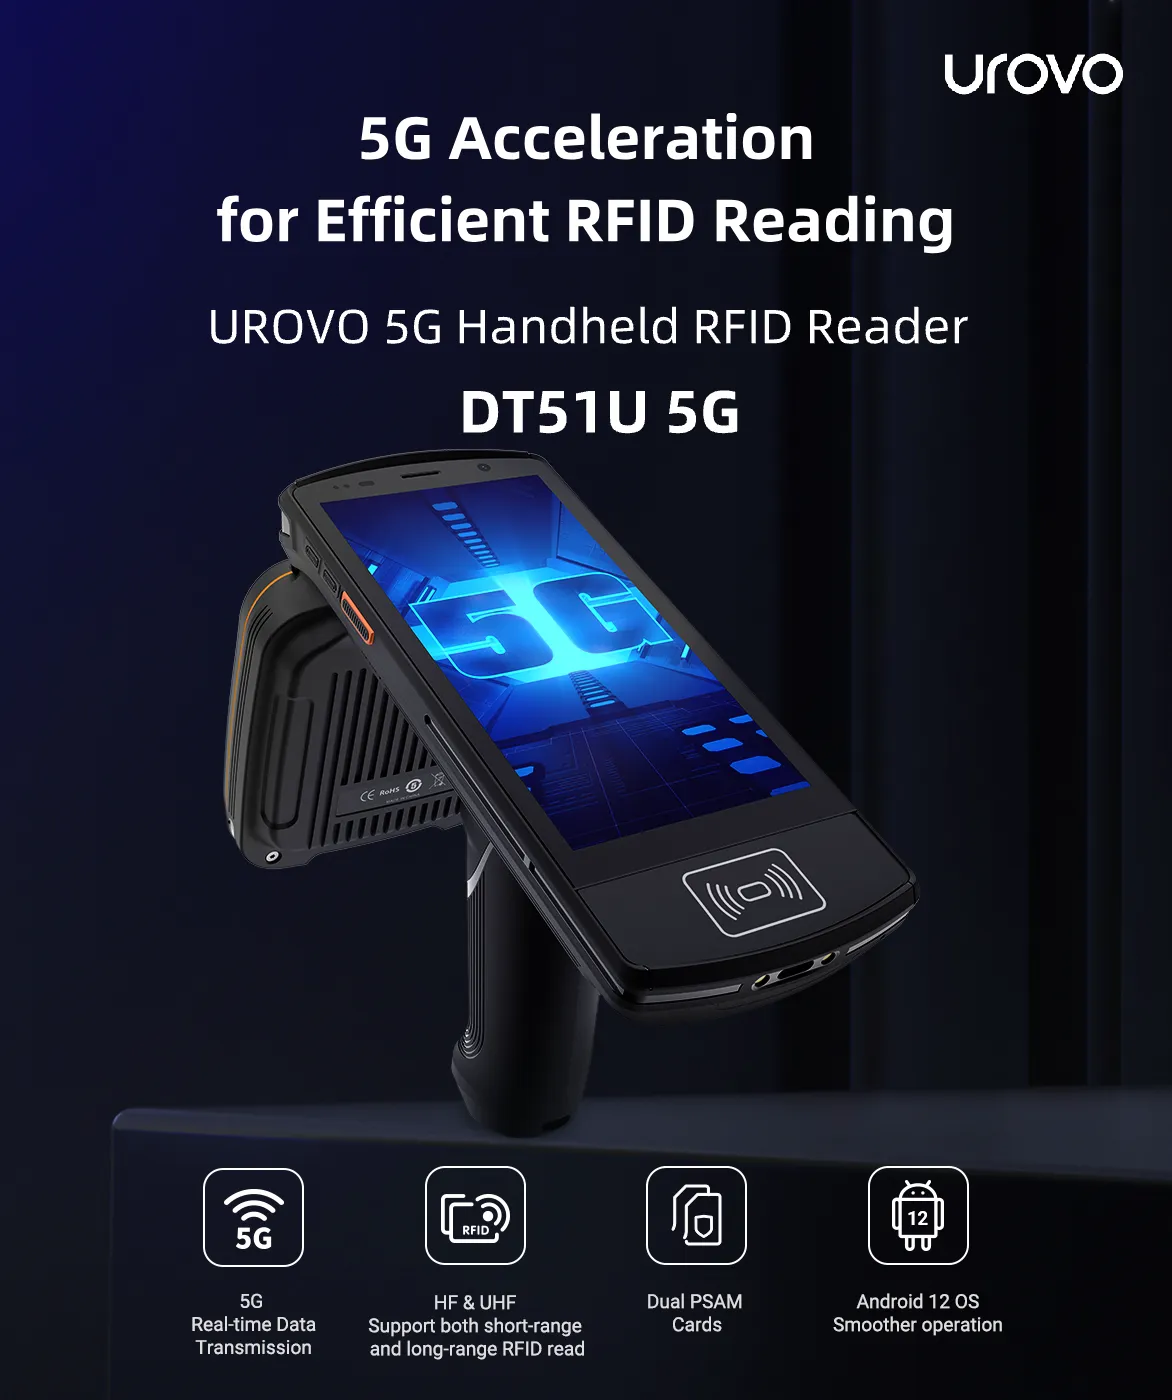 Tackling Application Challenges of UROVO 5G Handheld RFID Readers